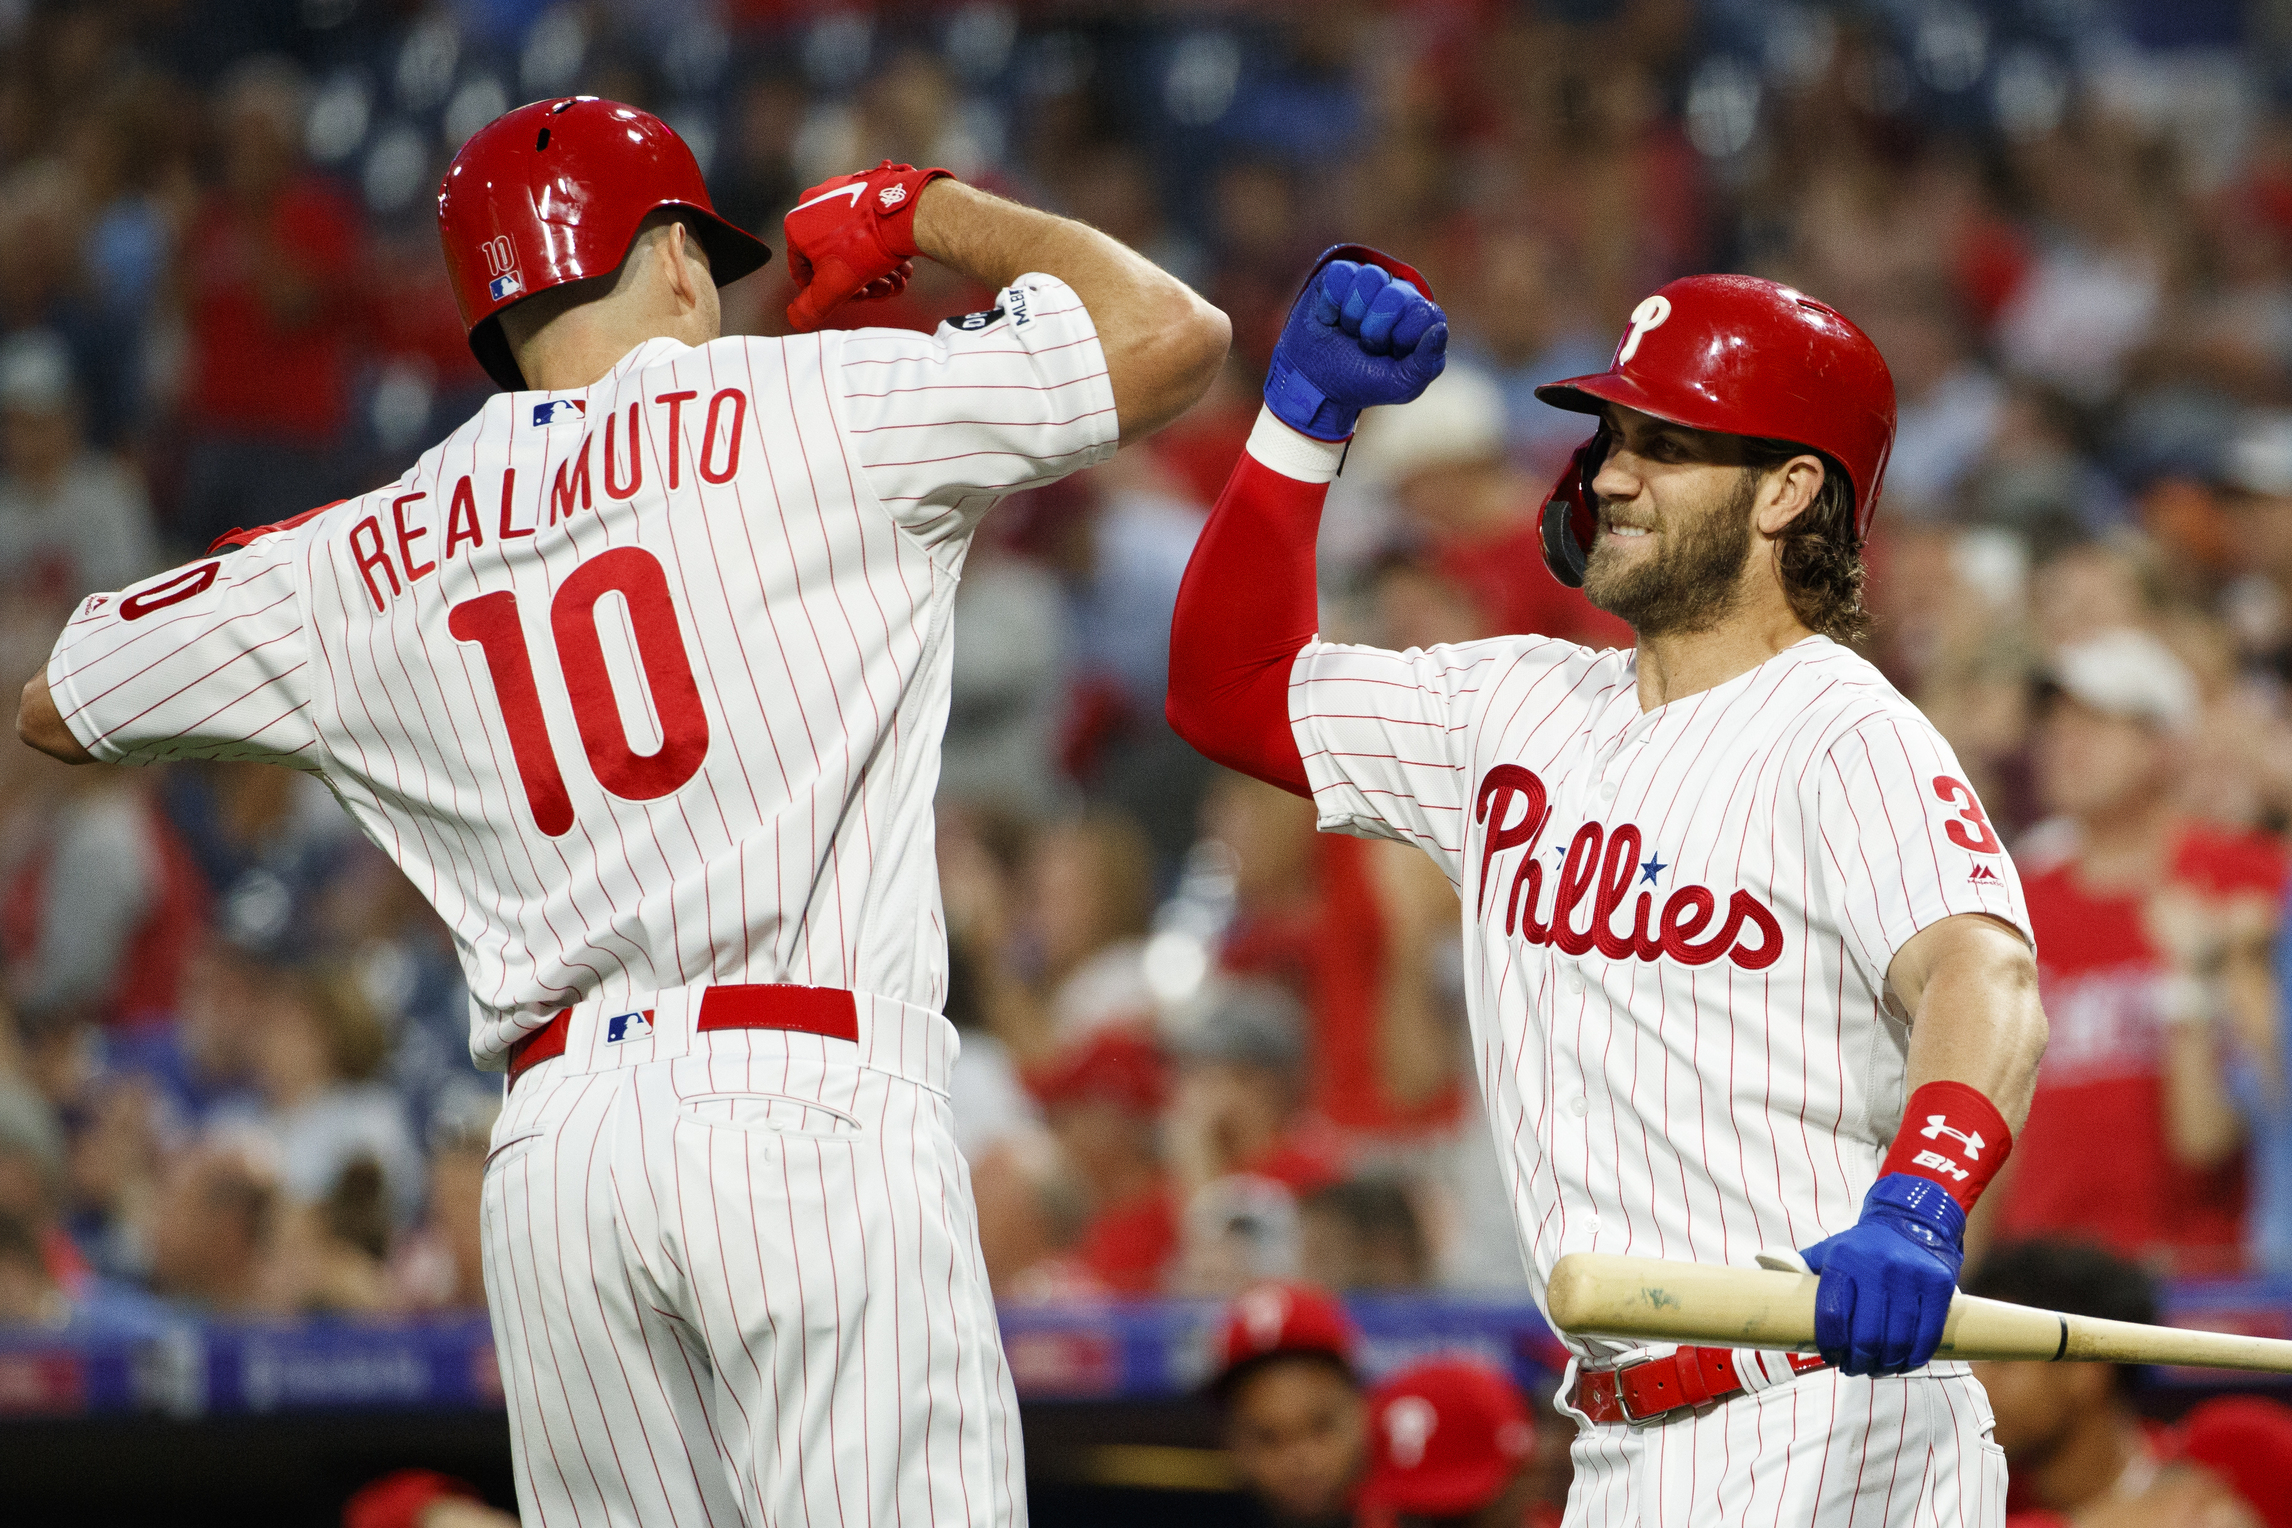 Dickerson homers twice, leads Phils to 6-5 win over Braves